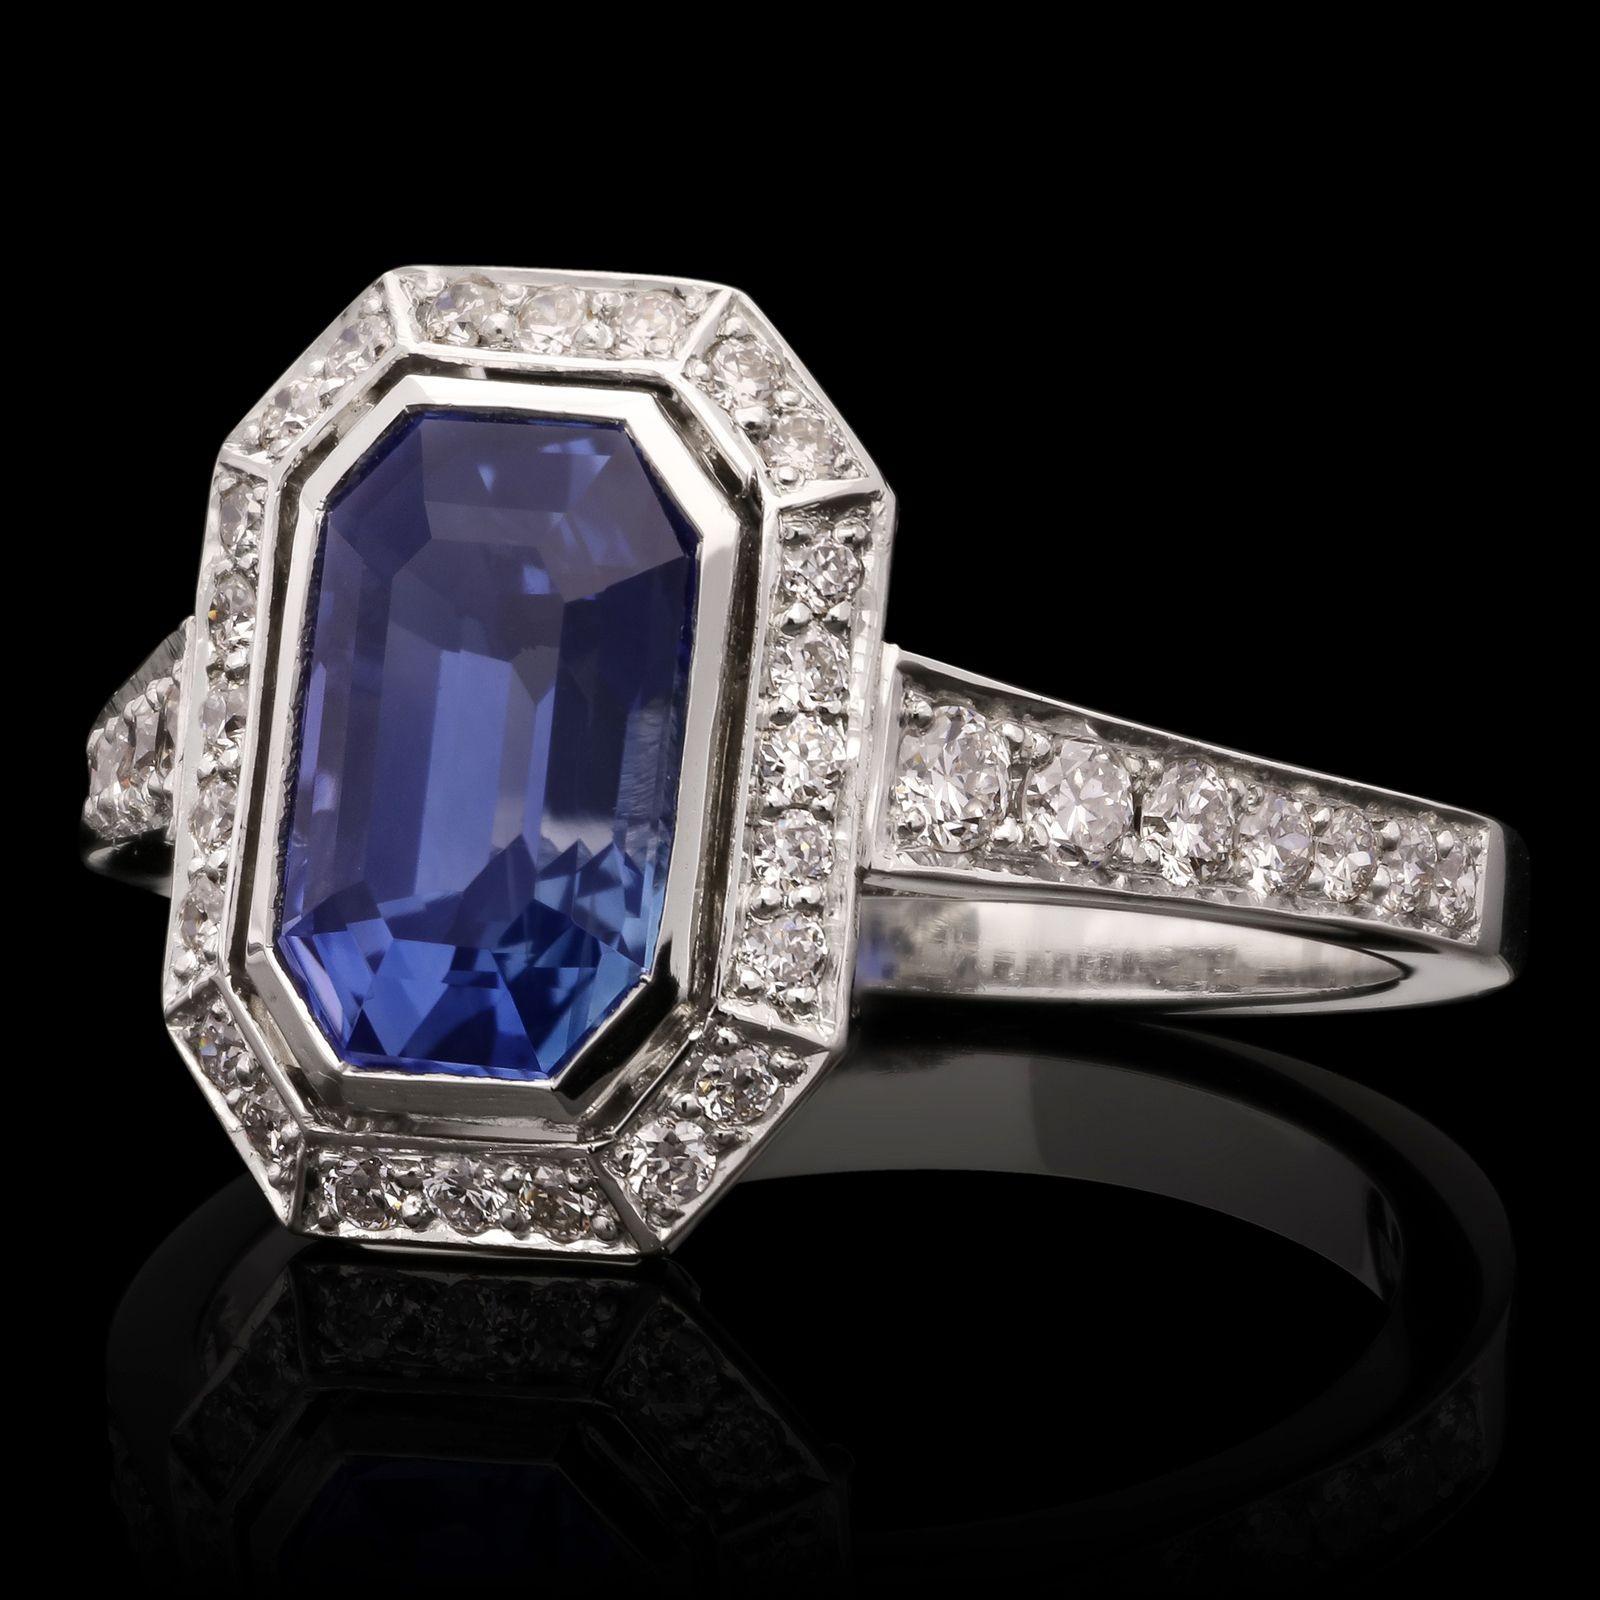 An elegant sapphire and diamond cluster ring by Hancocks, centred with a beautiful octagonal step-cut Madagascar sapphire weighing 2.15cts rub over set within a well-proportioned geometric cluster surround of round brilliant cut diamonds in channel